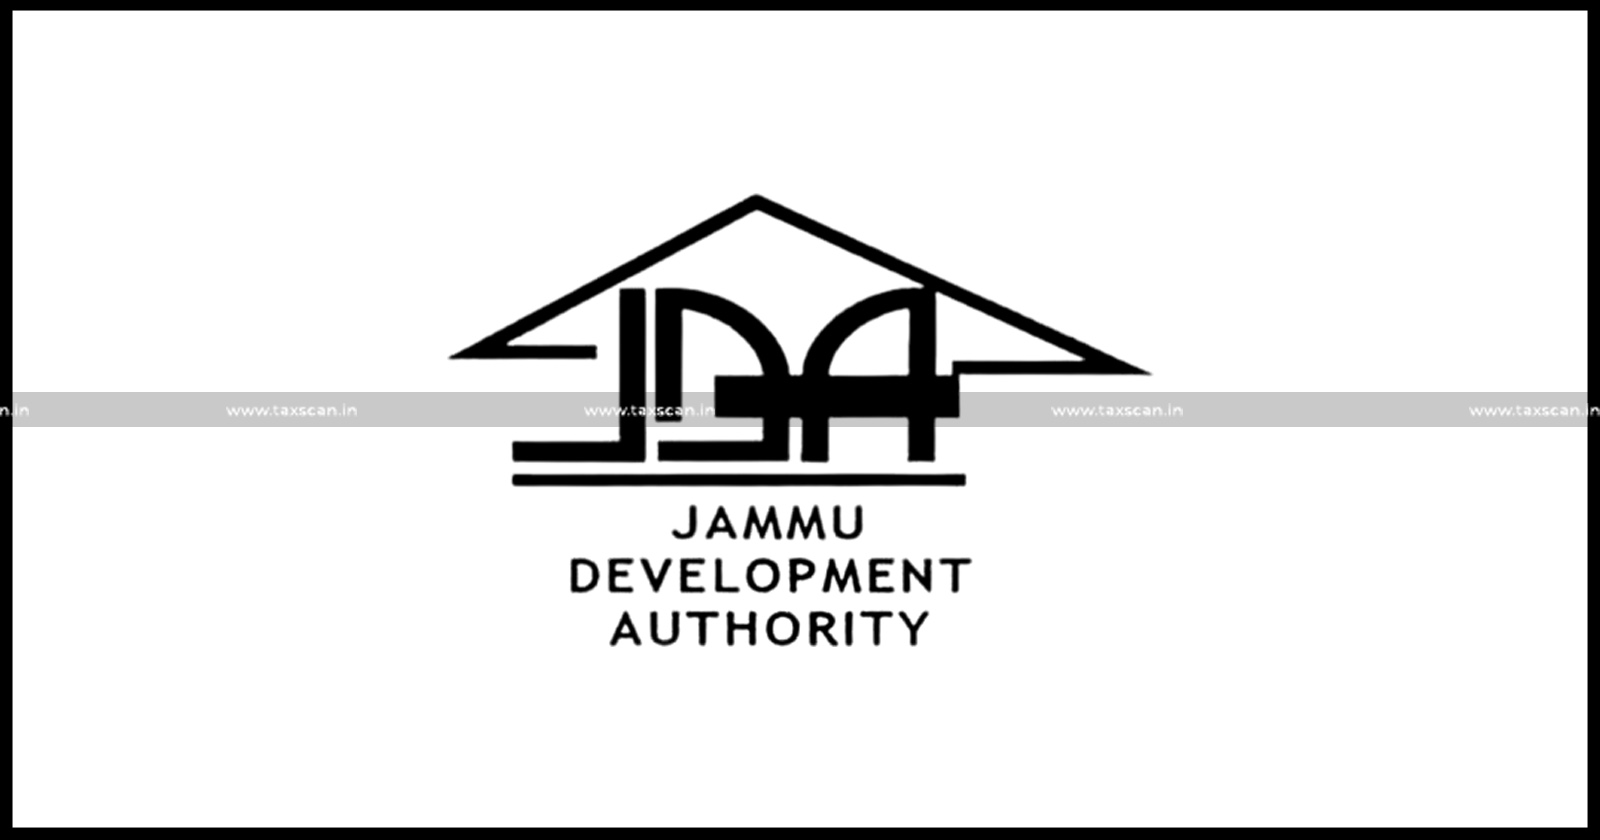 No Obligation on Bank to Deduct TDS from Interests on FD - Bank - Deduct TDS from Interests on FD Paid to Jammu Development Authority - J & K and Ladakh High Court - TDS - Taxscan